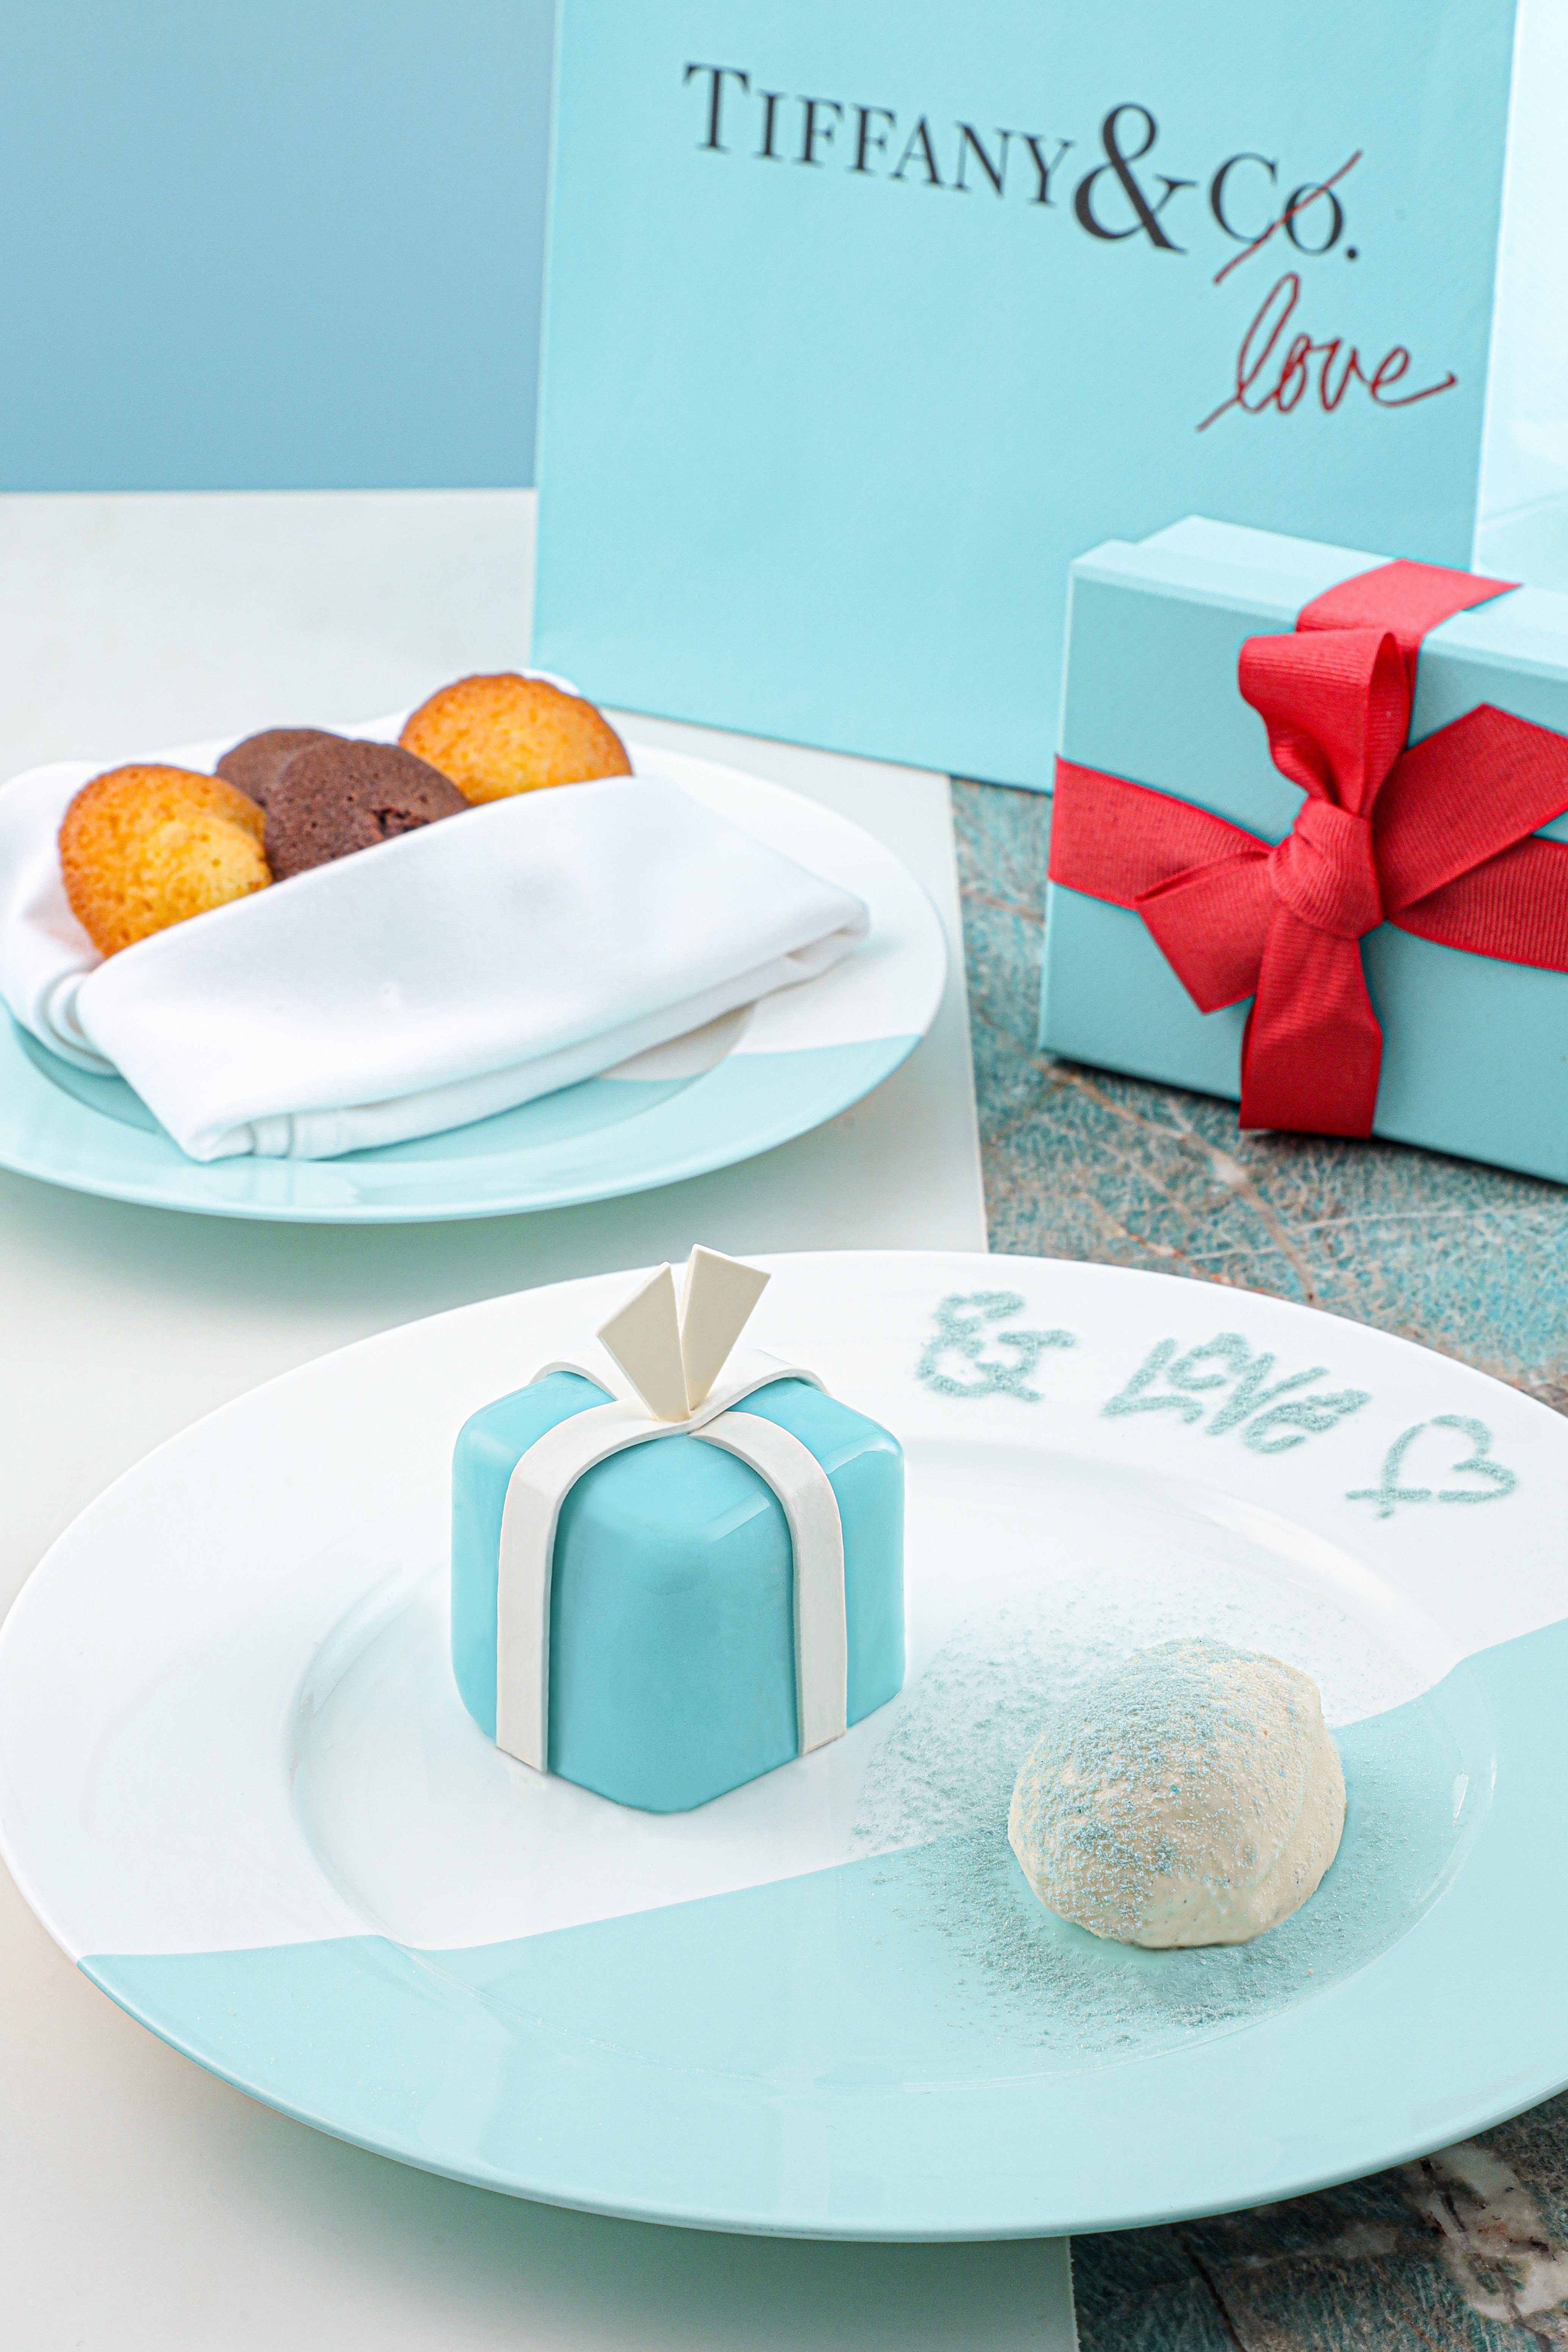 A Petit Blue Box Cake is part of the special Valentine’s Day menu at the Tiffany Blue Box Cafe. Photos: Tiffany & Co. Photos: handout